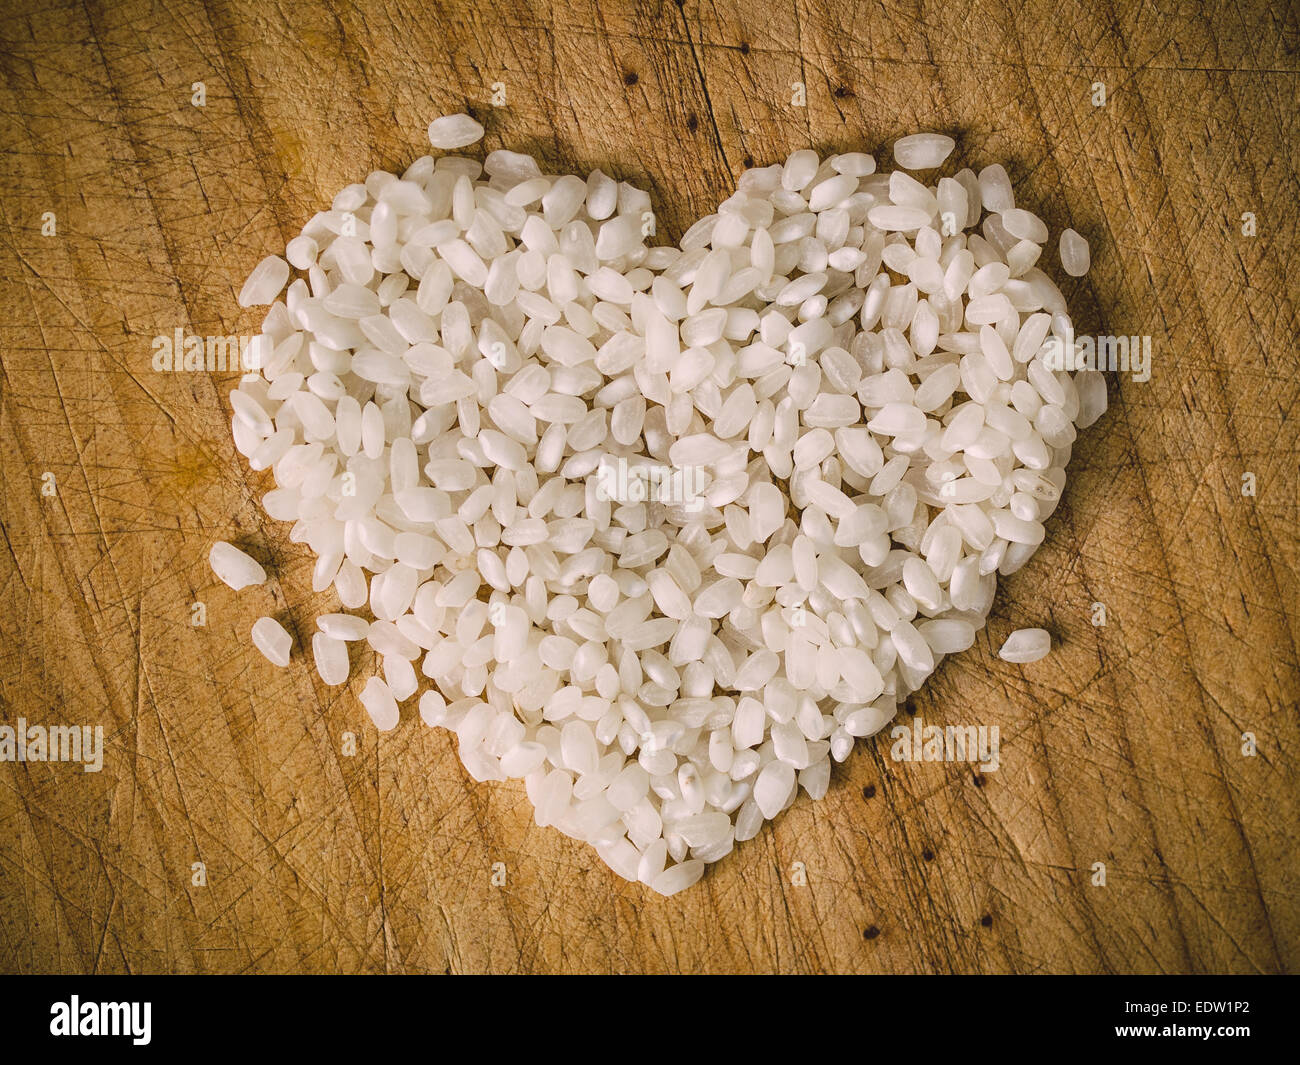 Rice heart on wooden background in a overhead shot Stock Photo